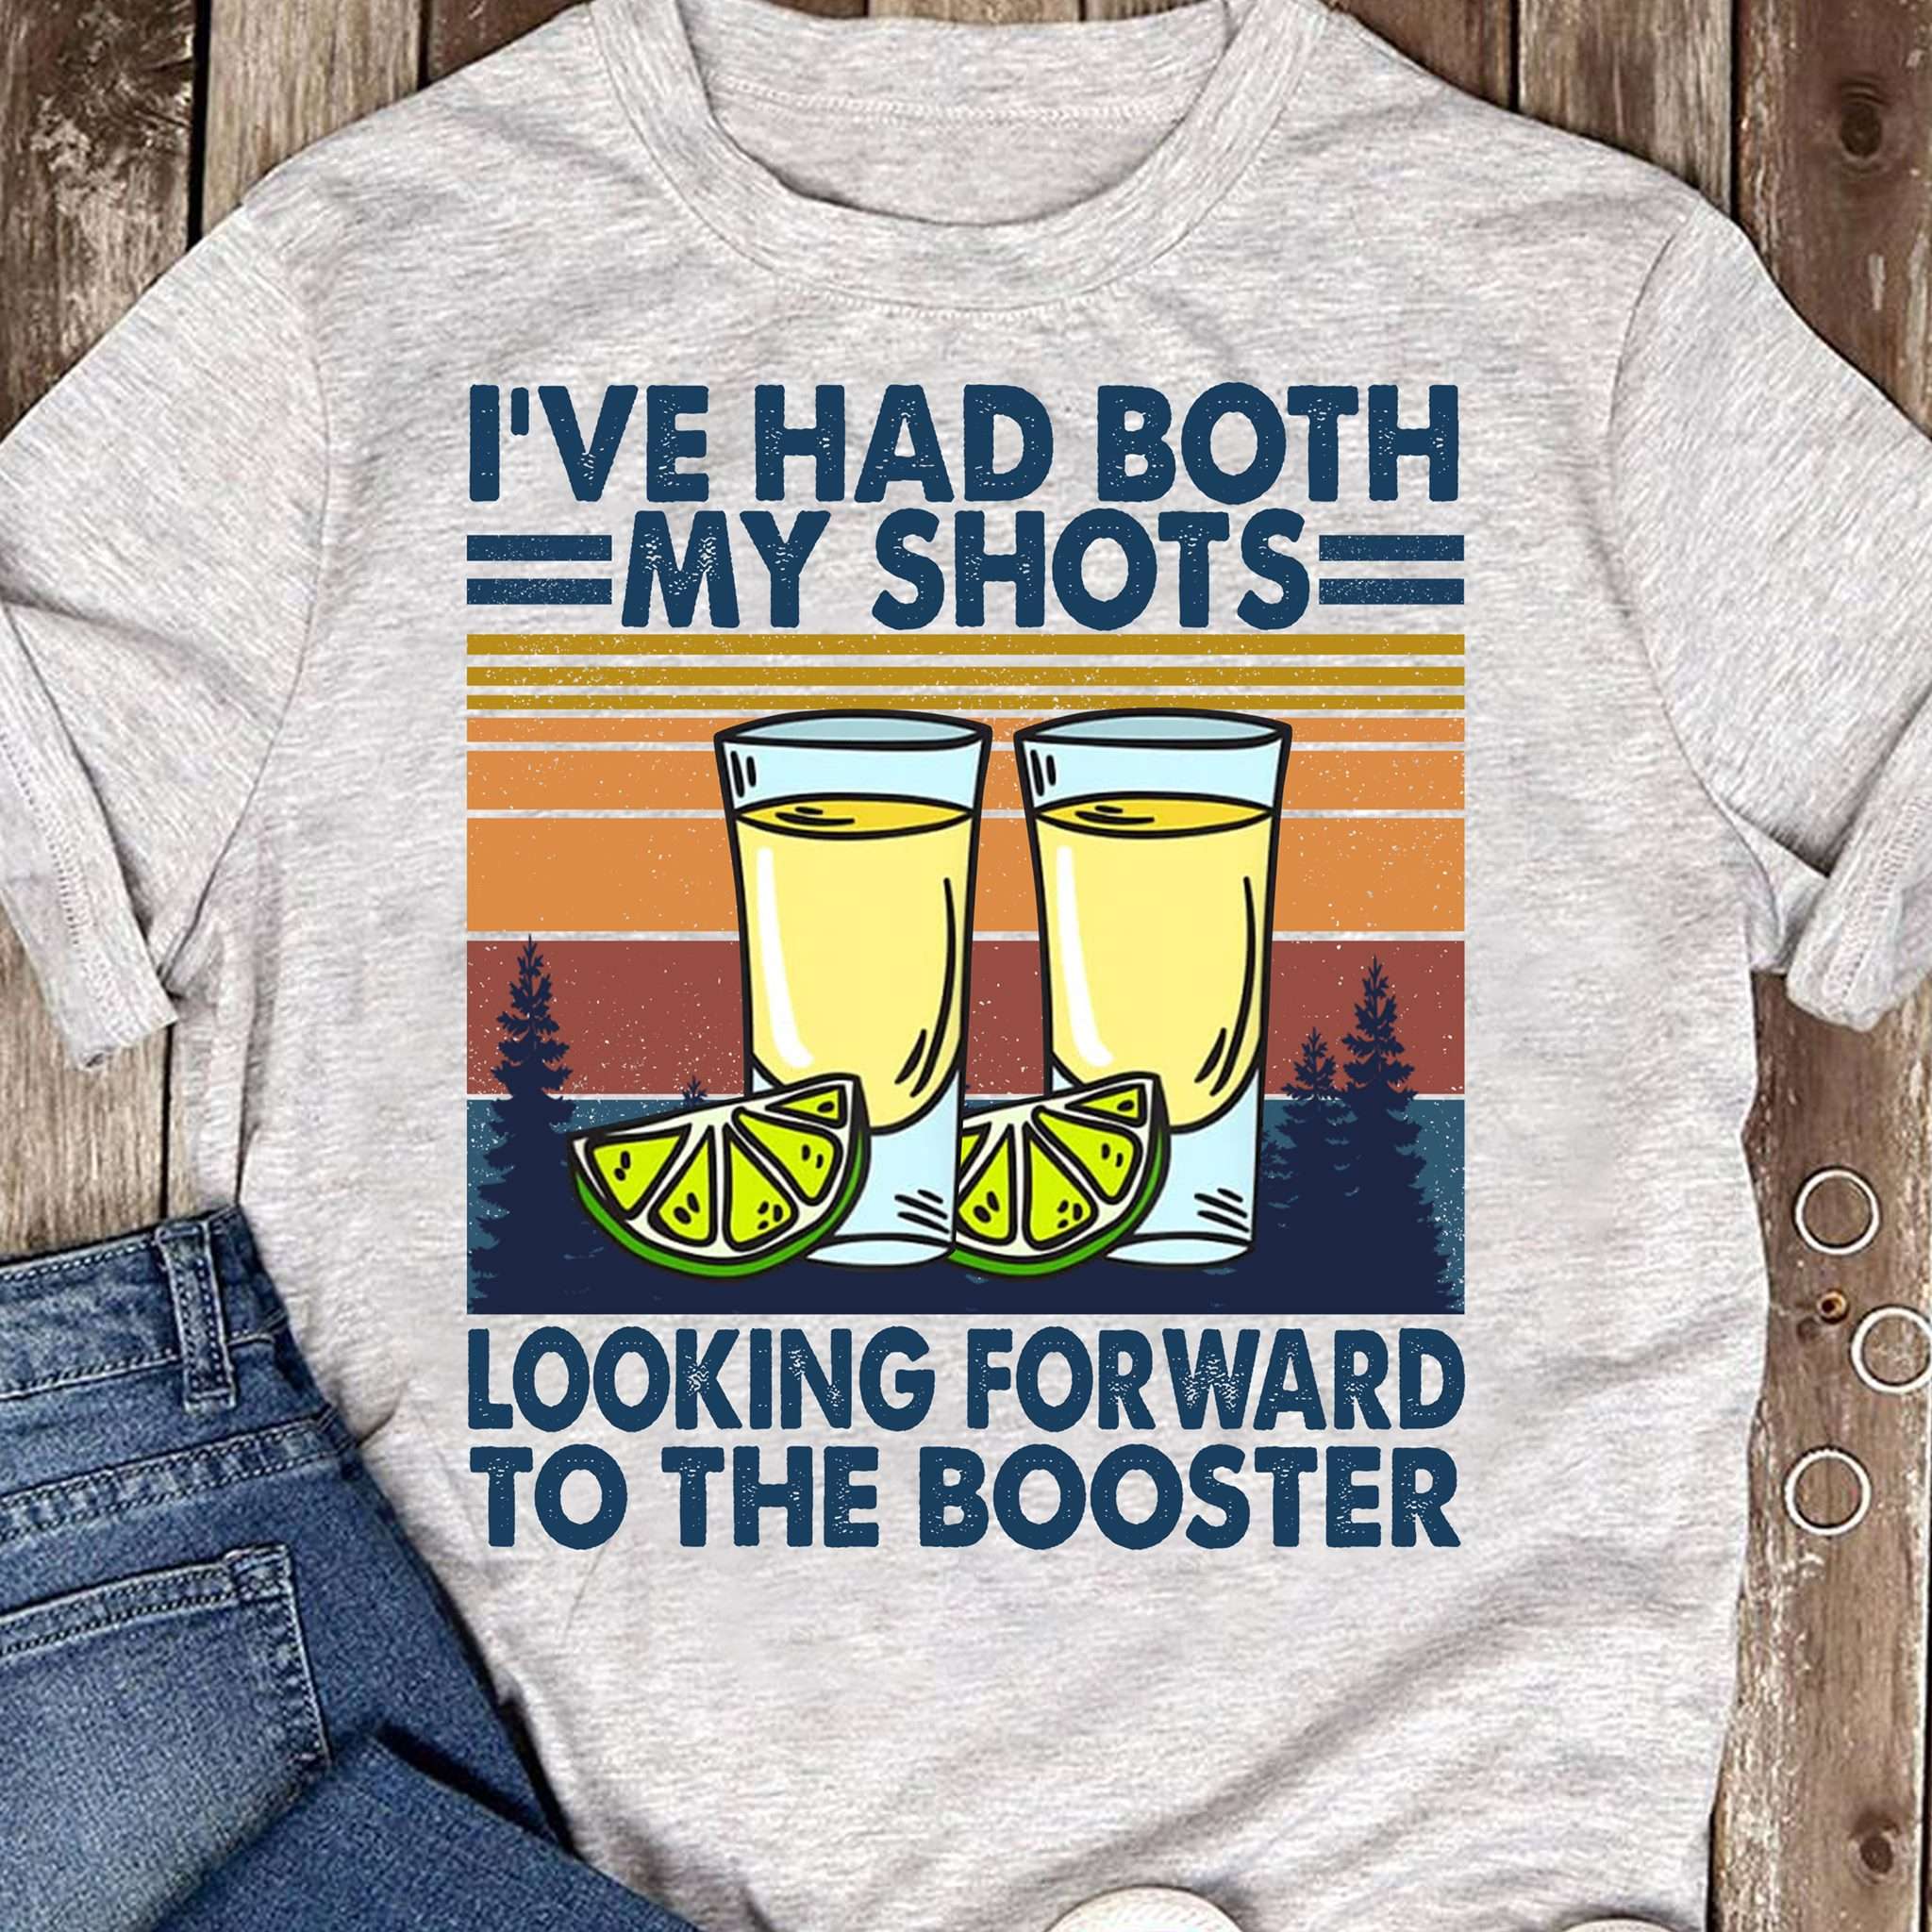 I've had both my shots, looking forward to the booster - Lime and wine